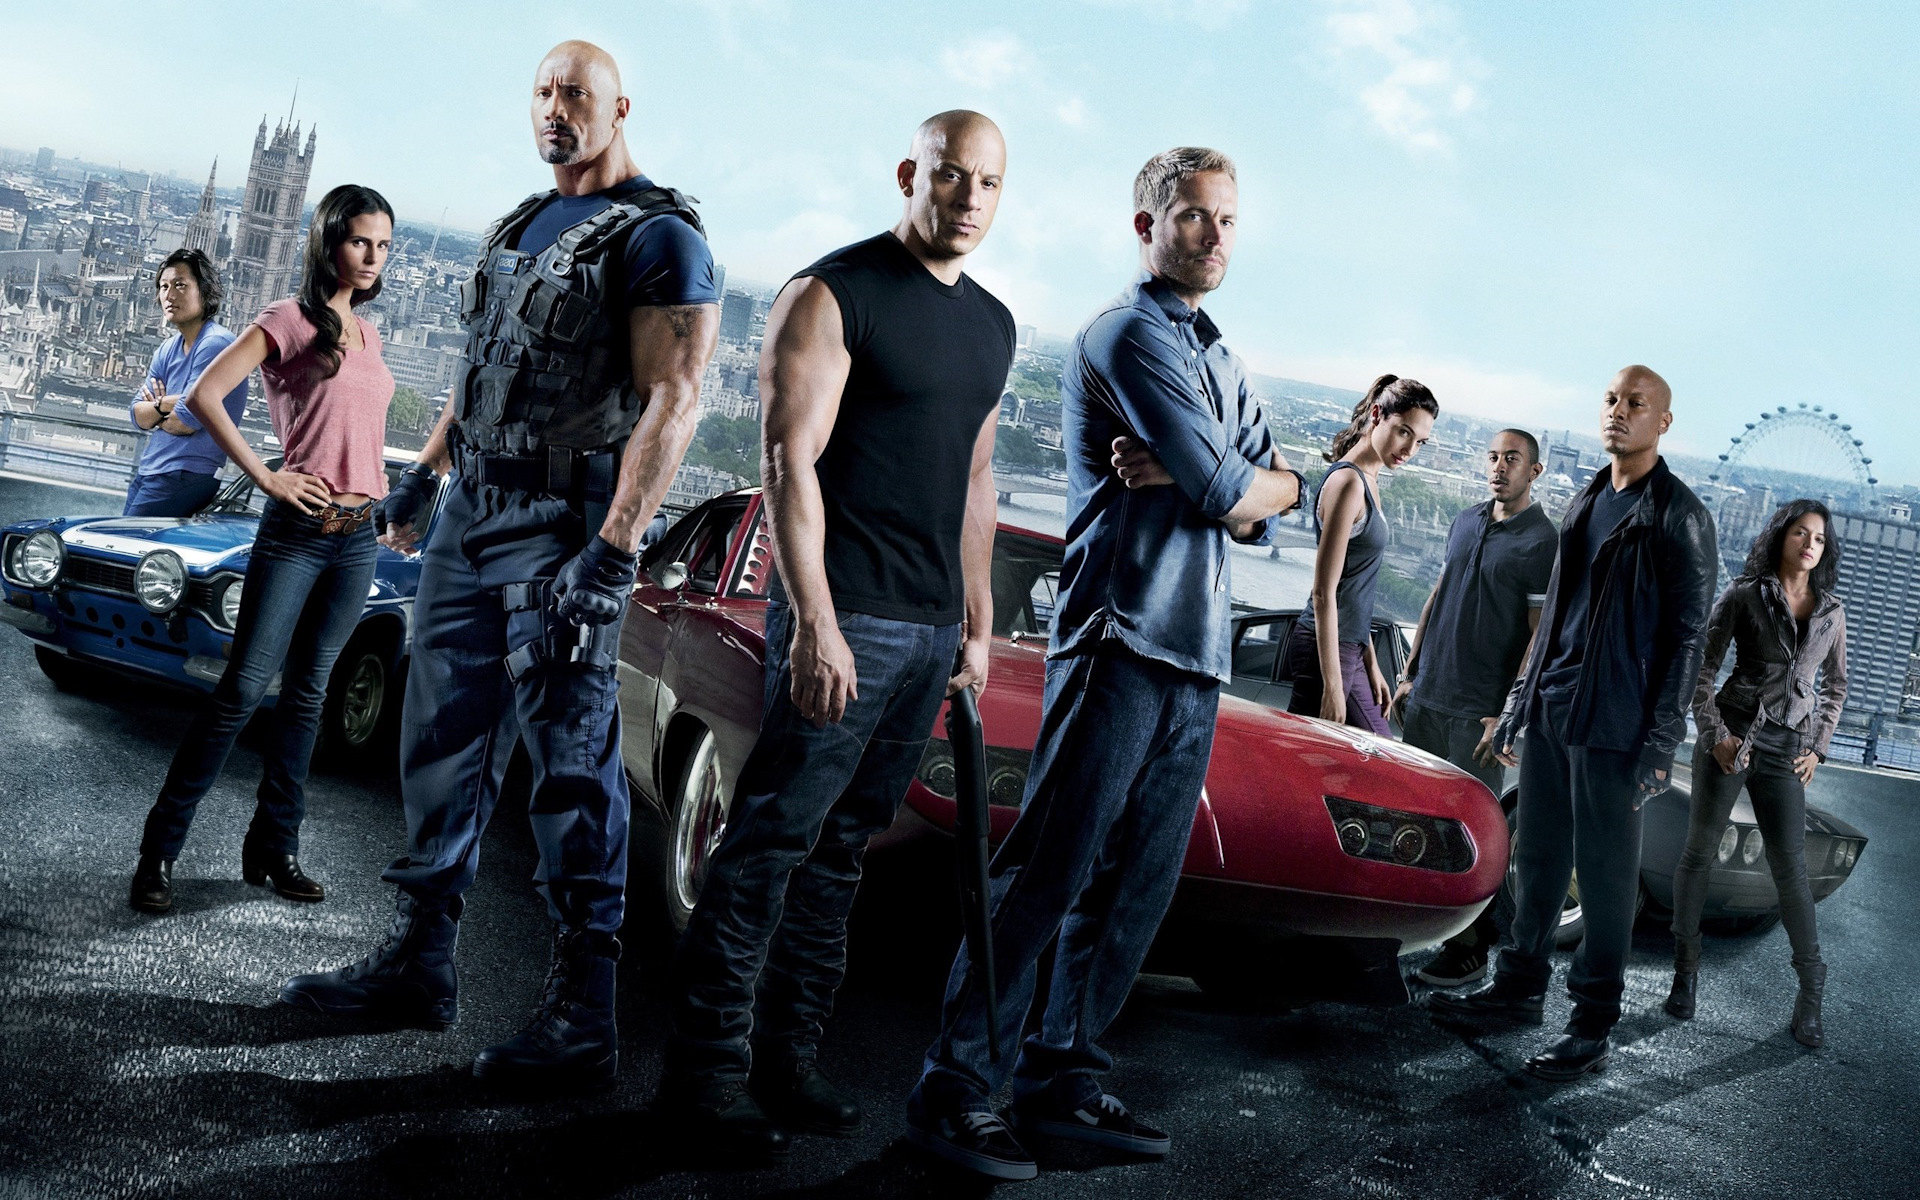 Форсаж качество 720. Fast & Furious 6 2013 poster. Fast and Furious 10 Paul Walker.